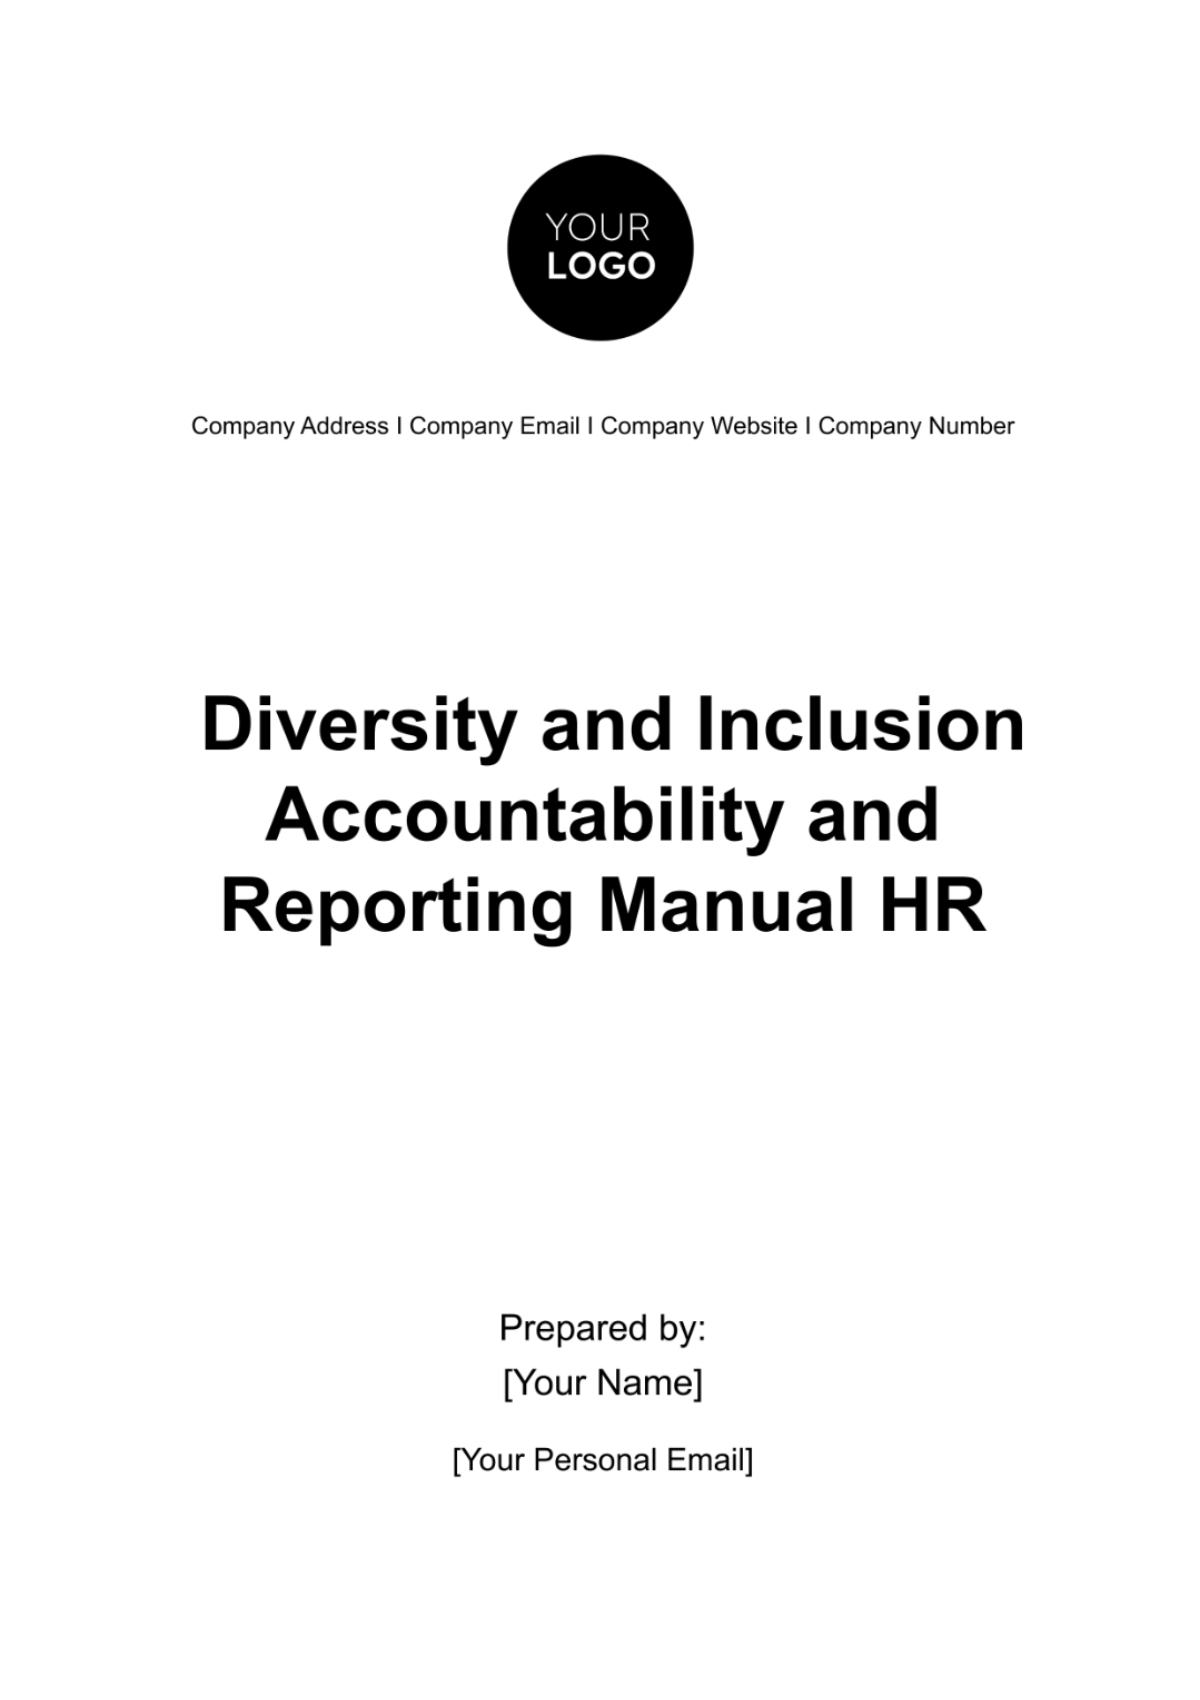 Free Diversity and Inclusion Accountability and Reporting Manual HR Template